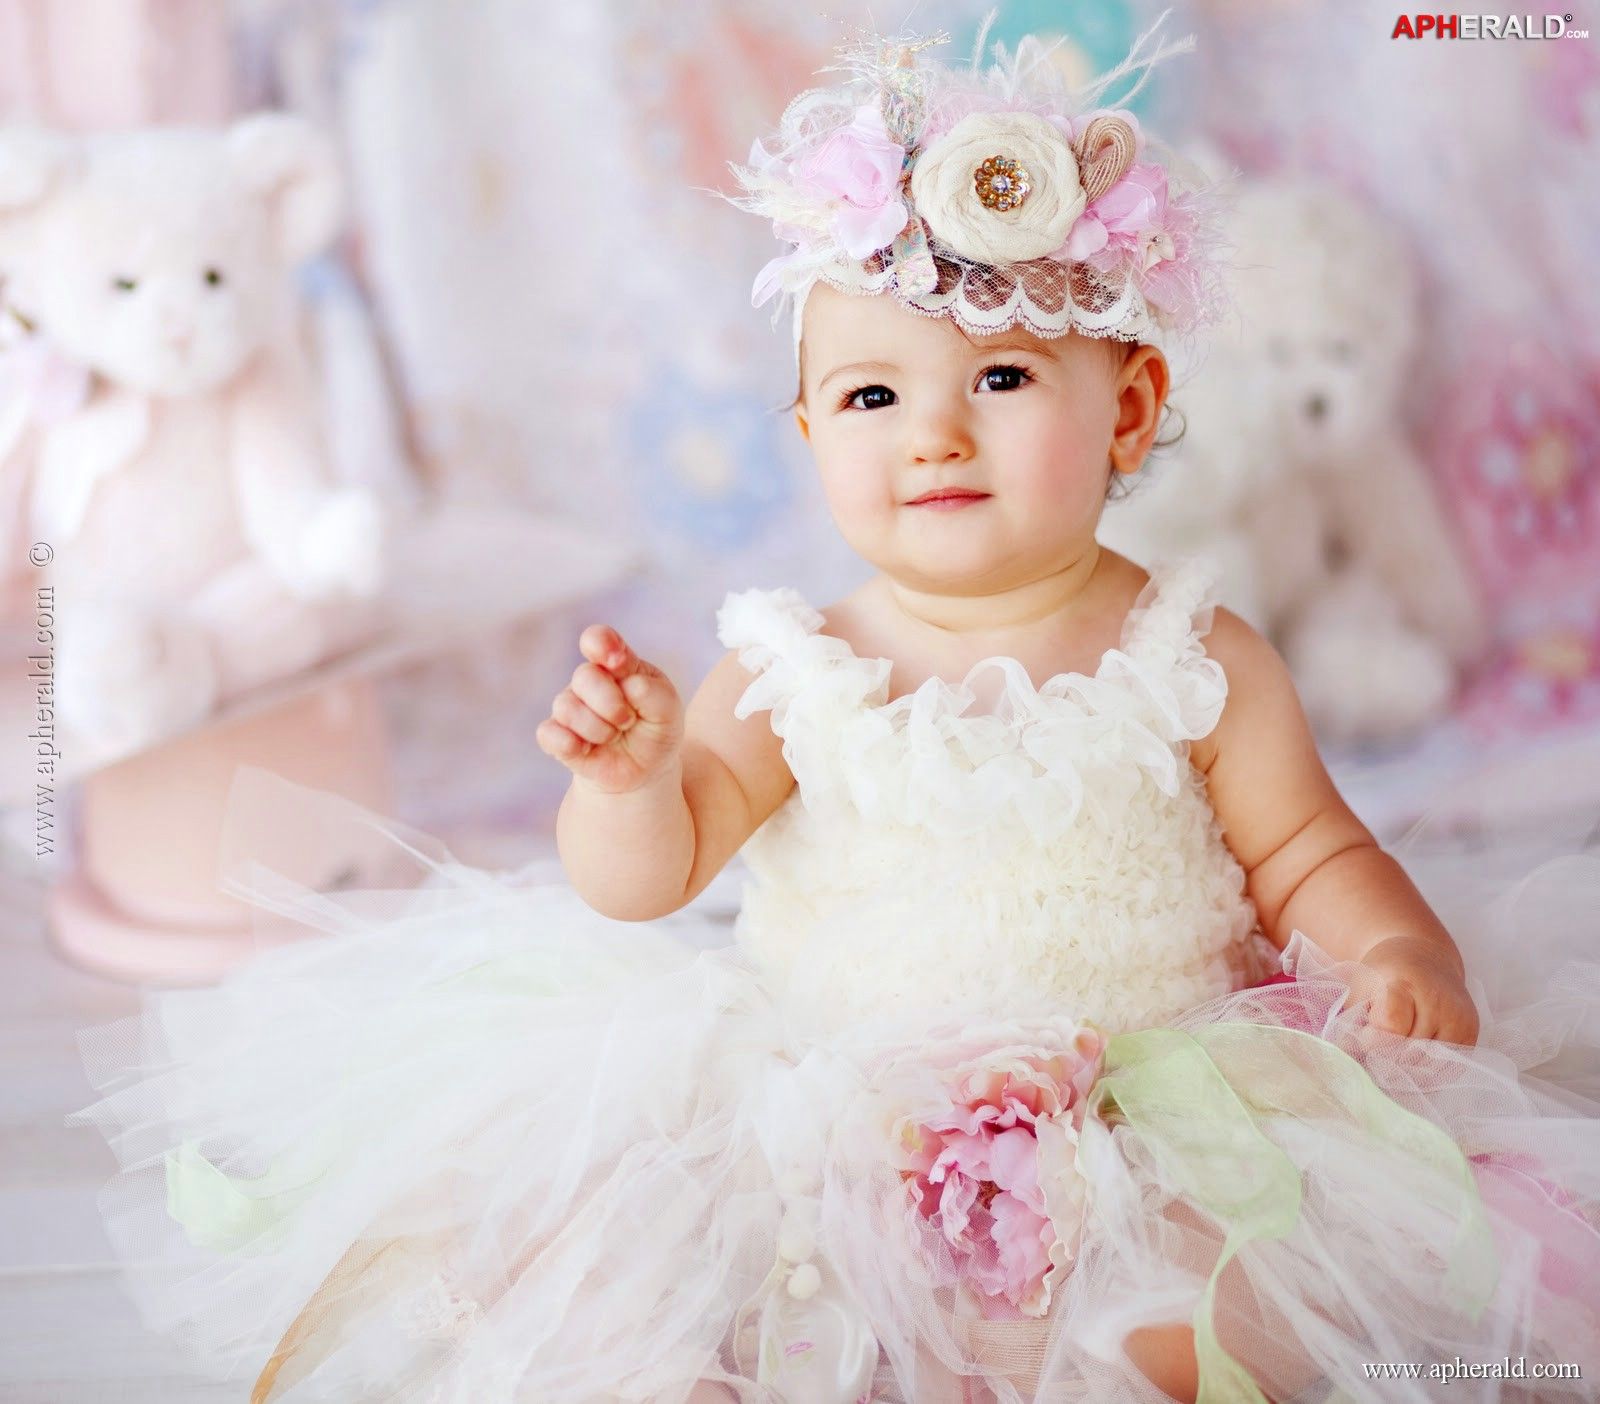 Beautiful Babies on Pinterest | Cute Babies, Cute Baby Photos and ...